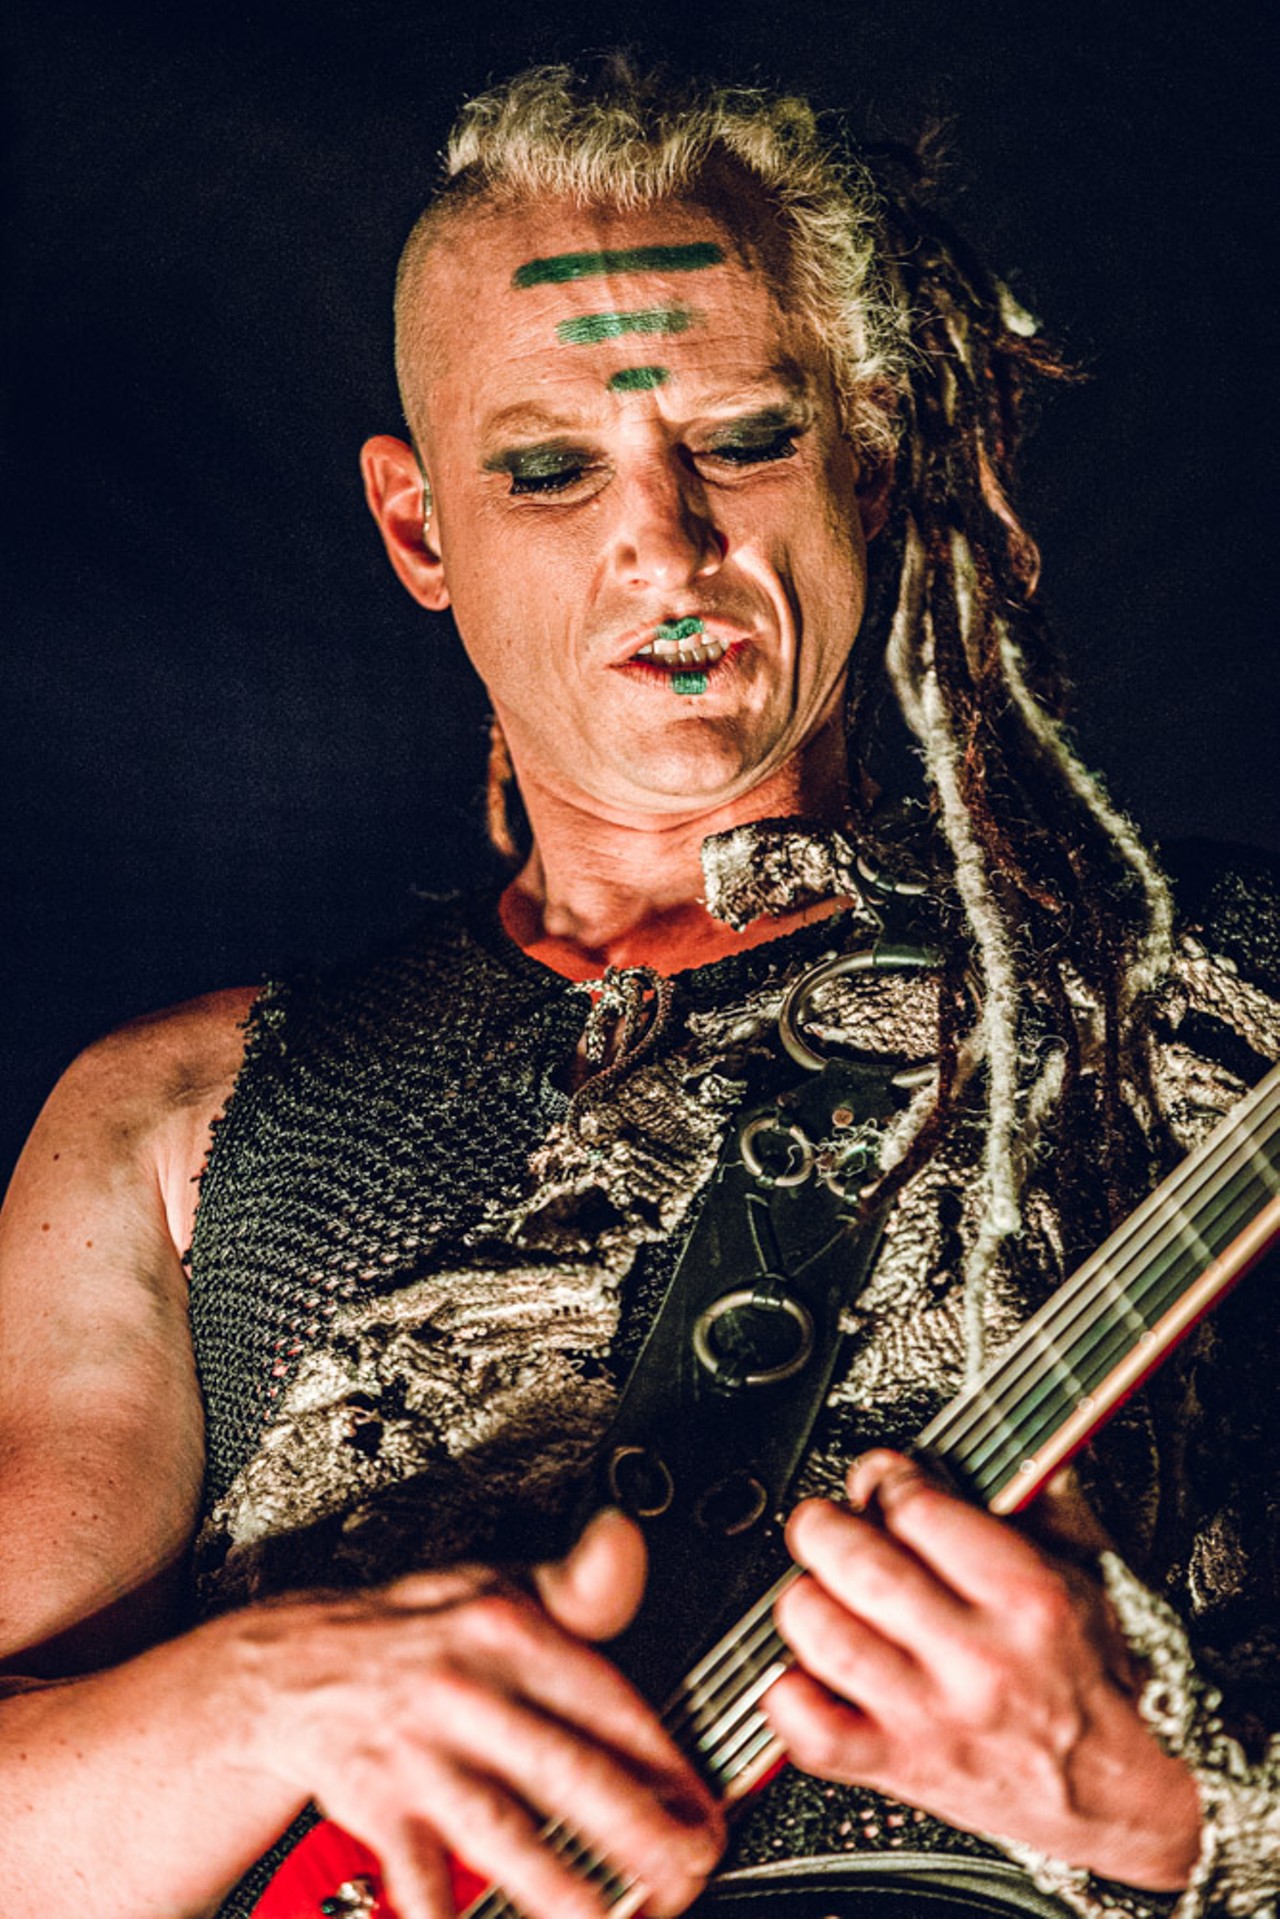 Review: In St. Pete, Skinny Puppy puts a cap on 40 years of EBM dominance [PHOTOS]